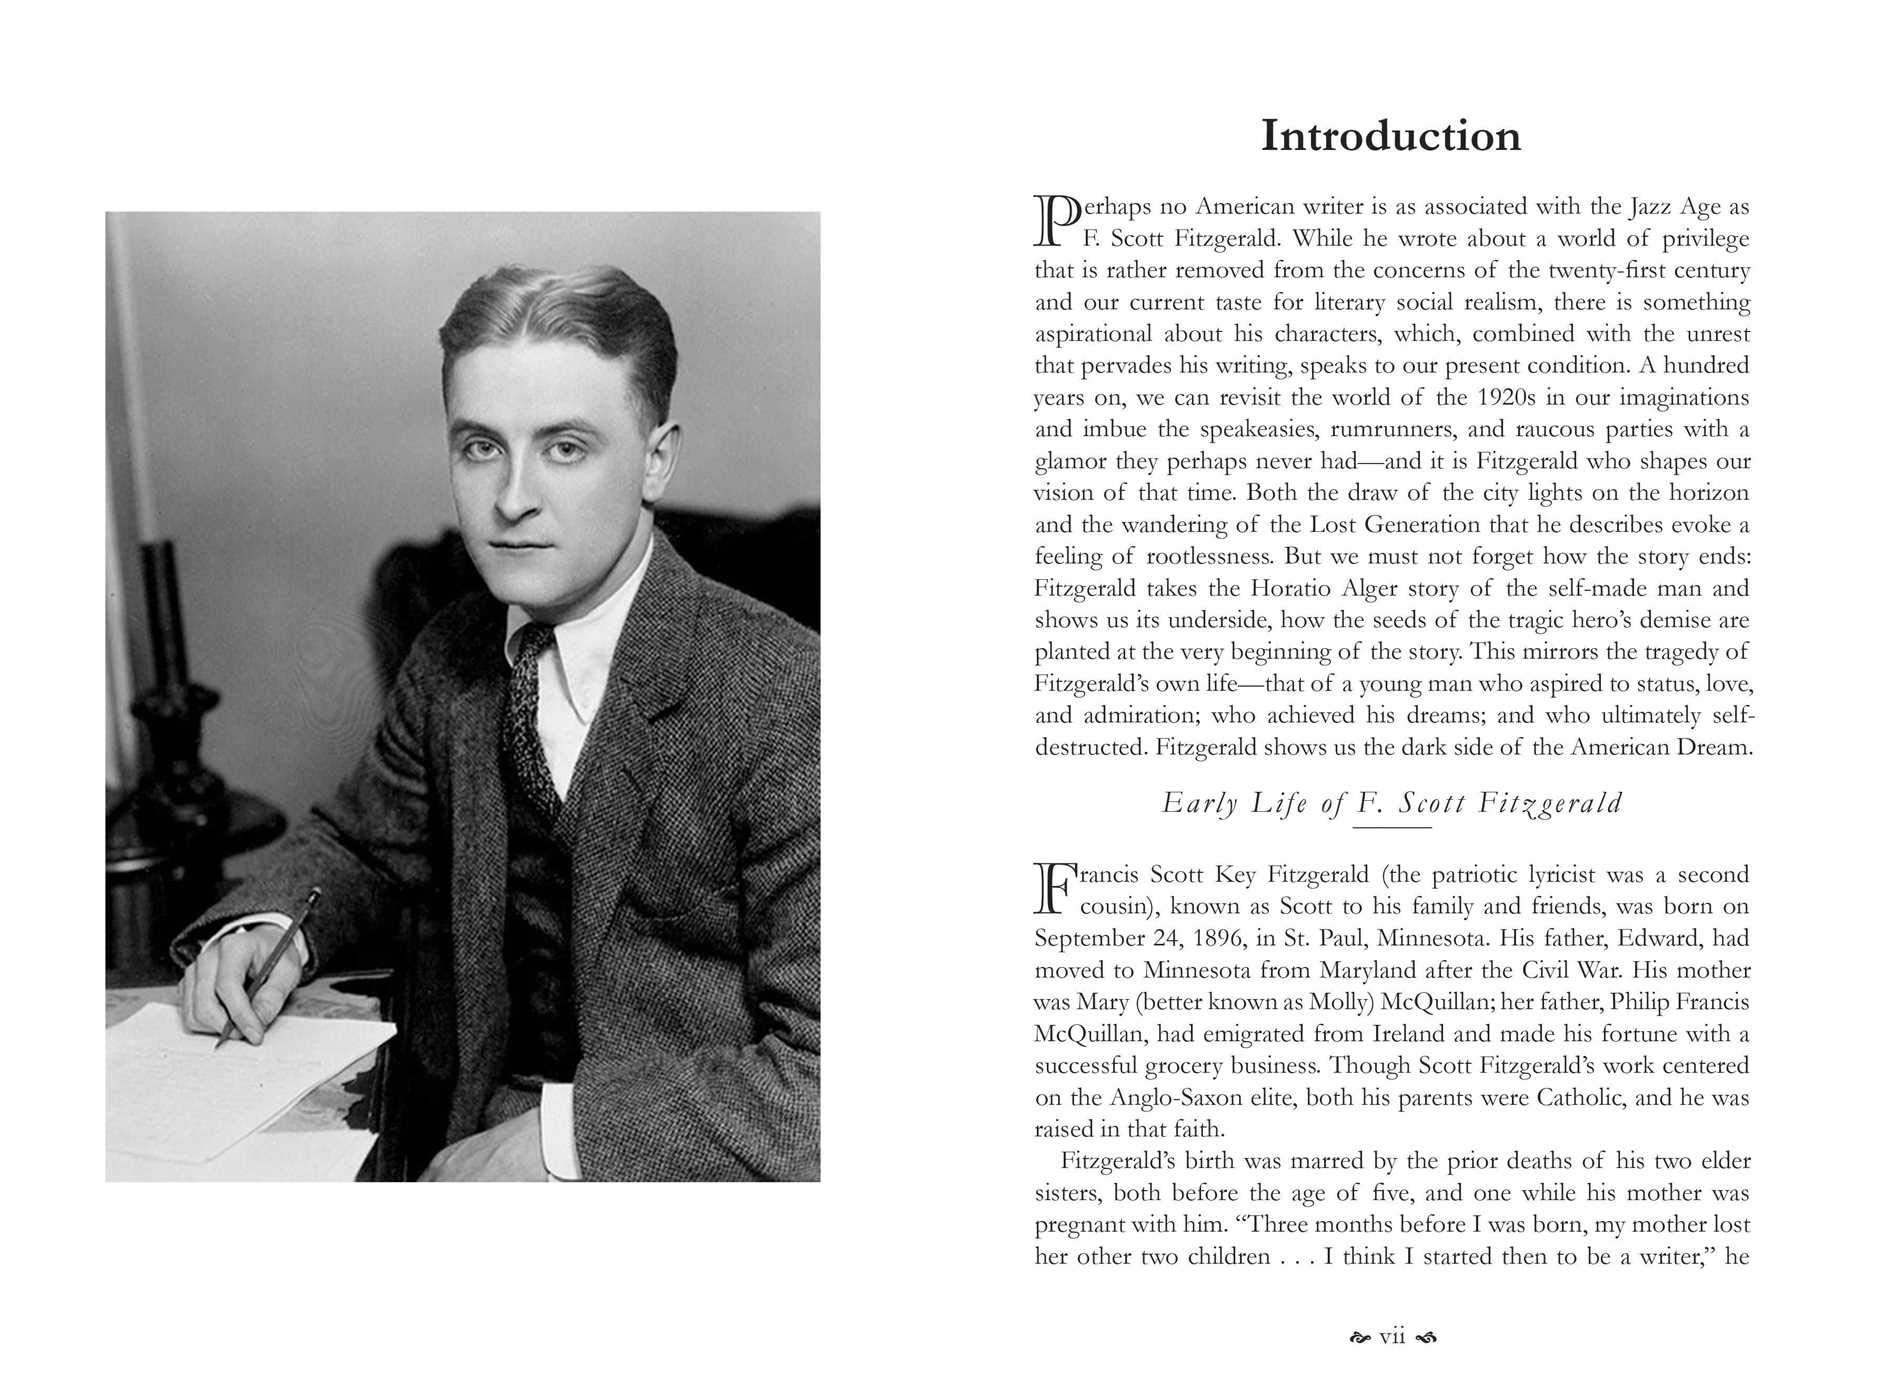 Great Gatsby and Other Works | F. Scott Fitzgerald